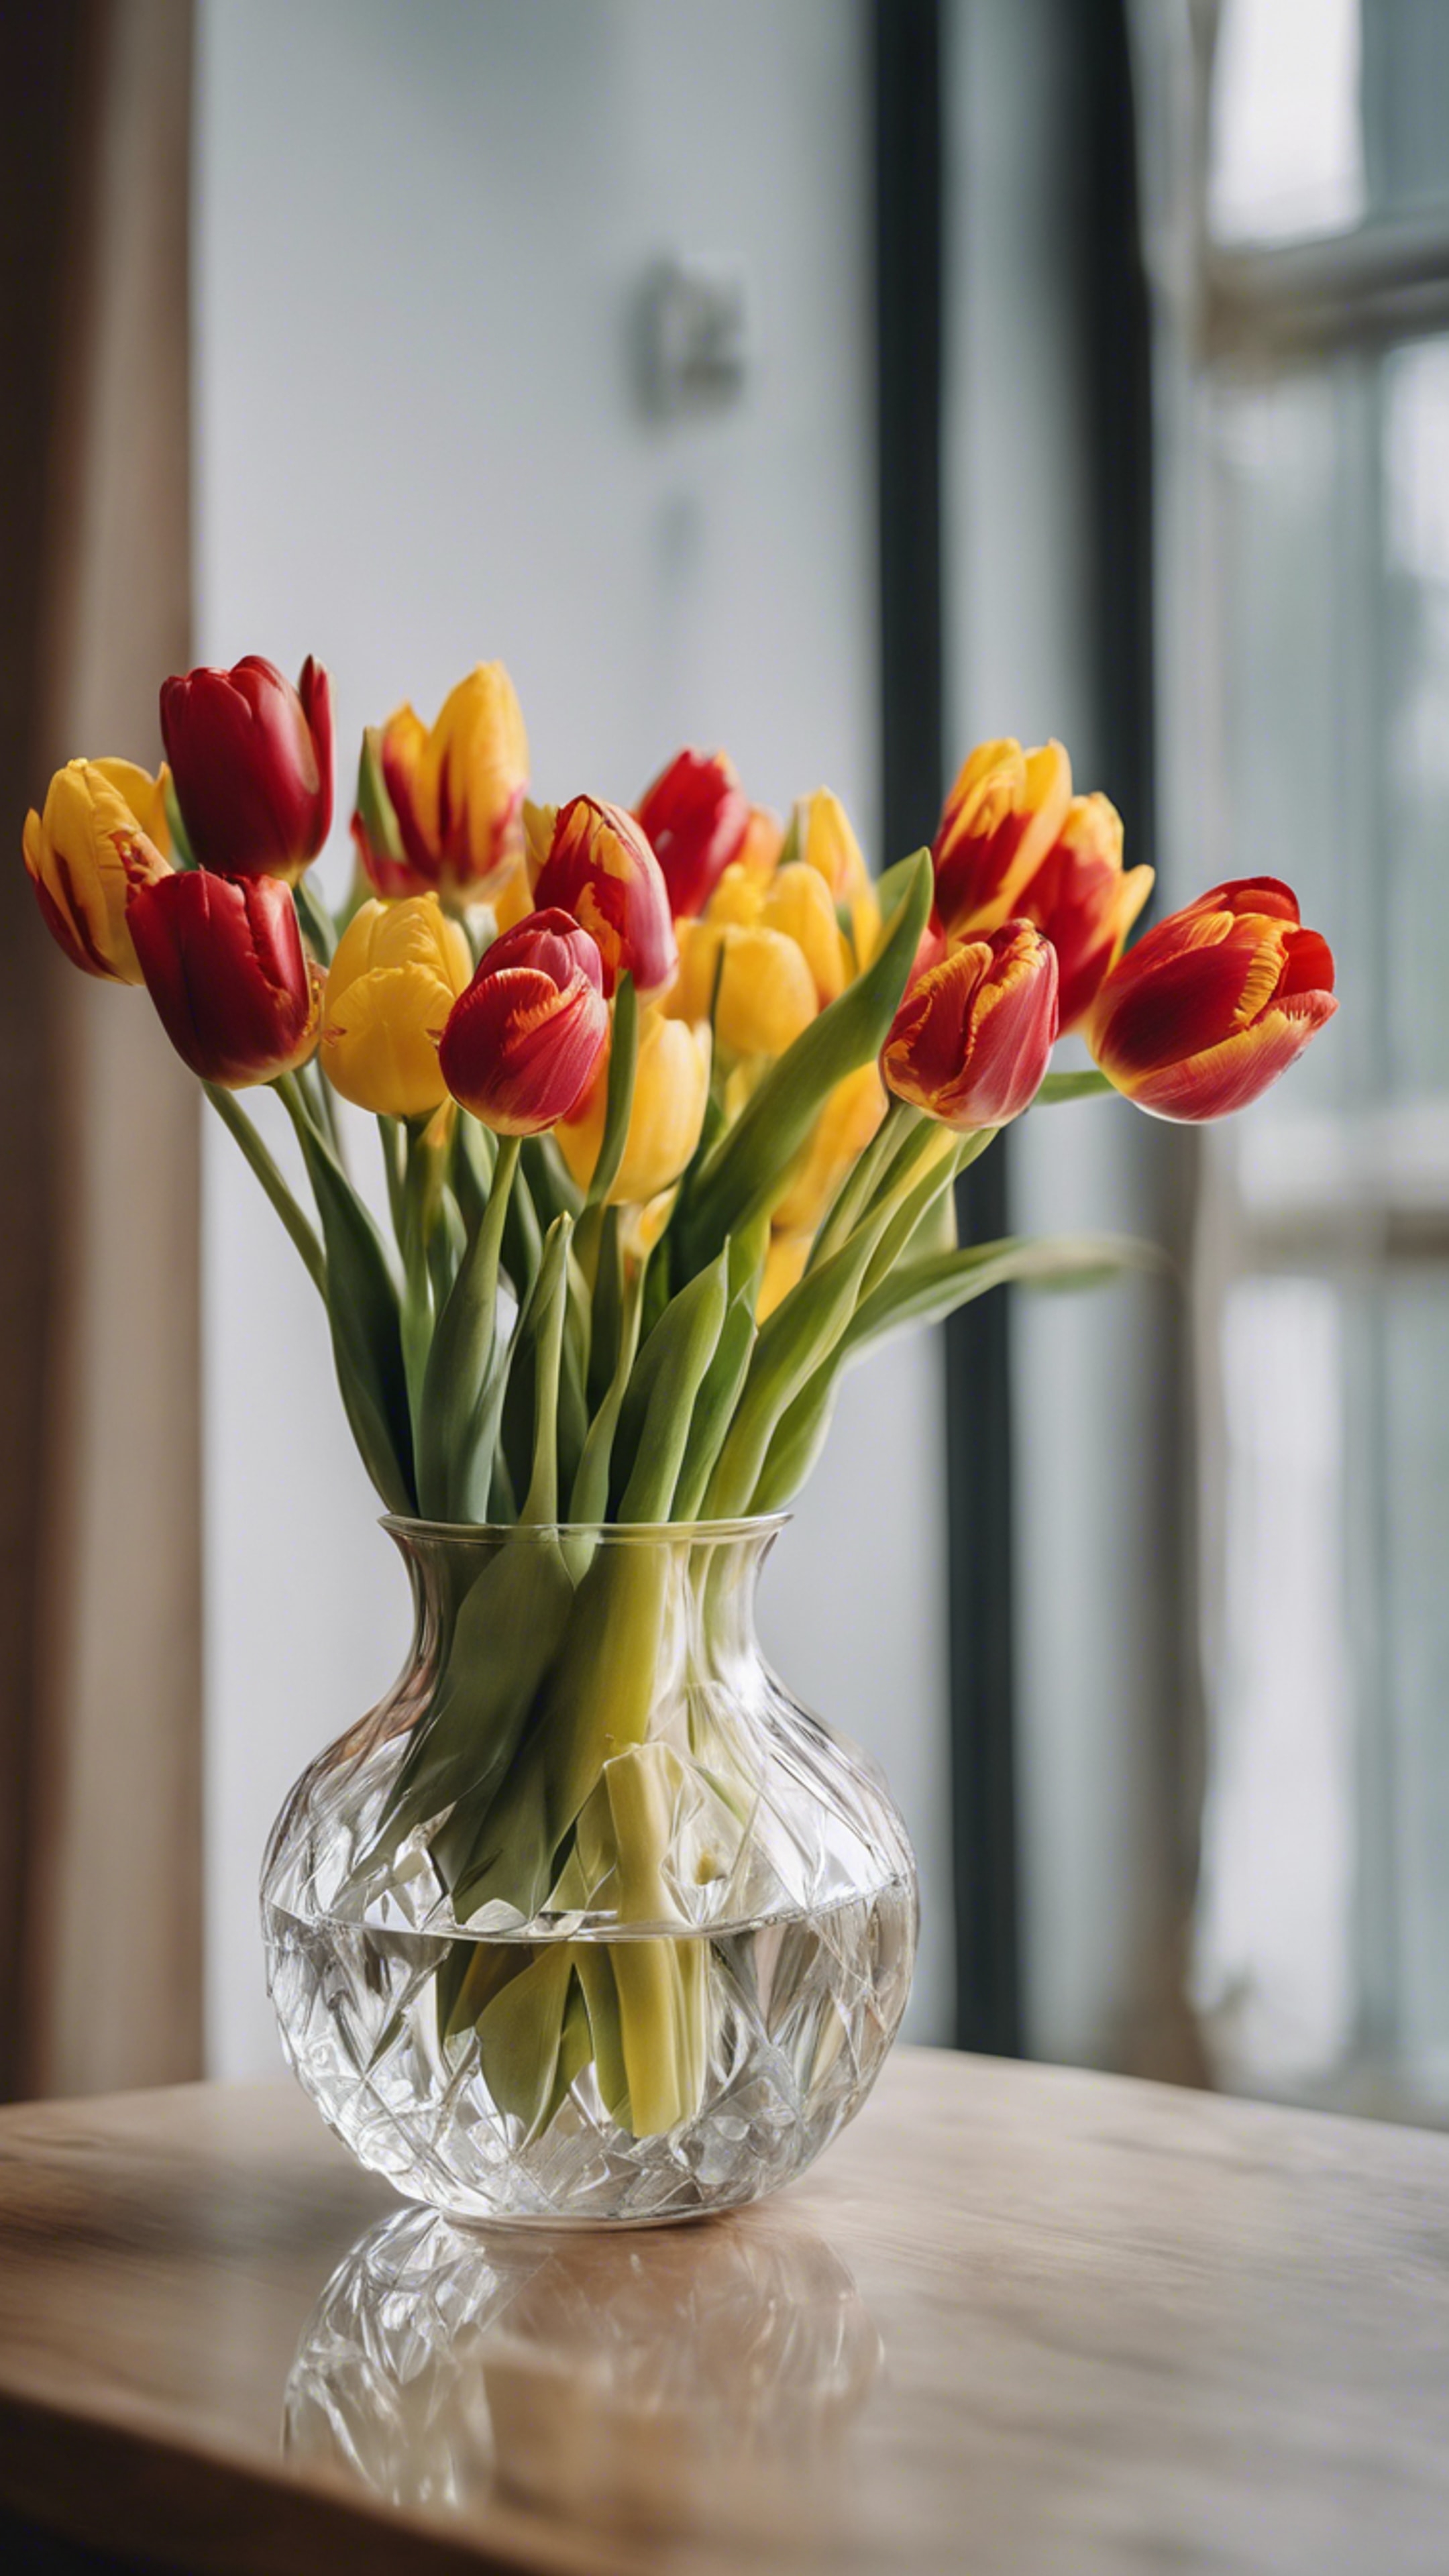 A bunch of fresh red and yellow tulips resting in a crystal clear vase. Tapeet[770eab0b3cc545c1af9b]